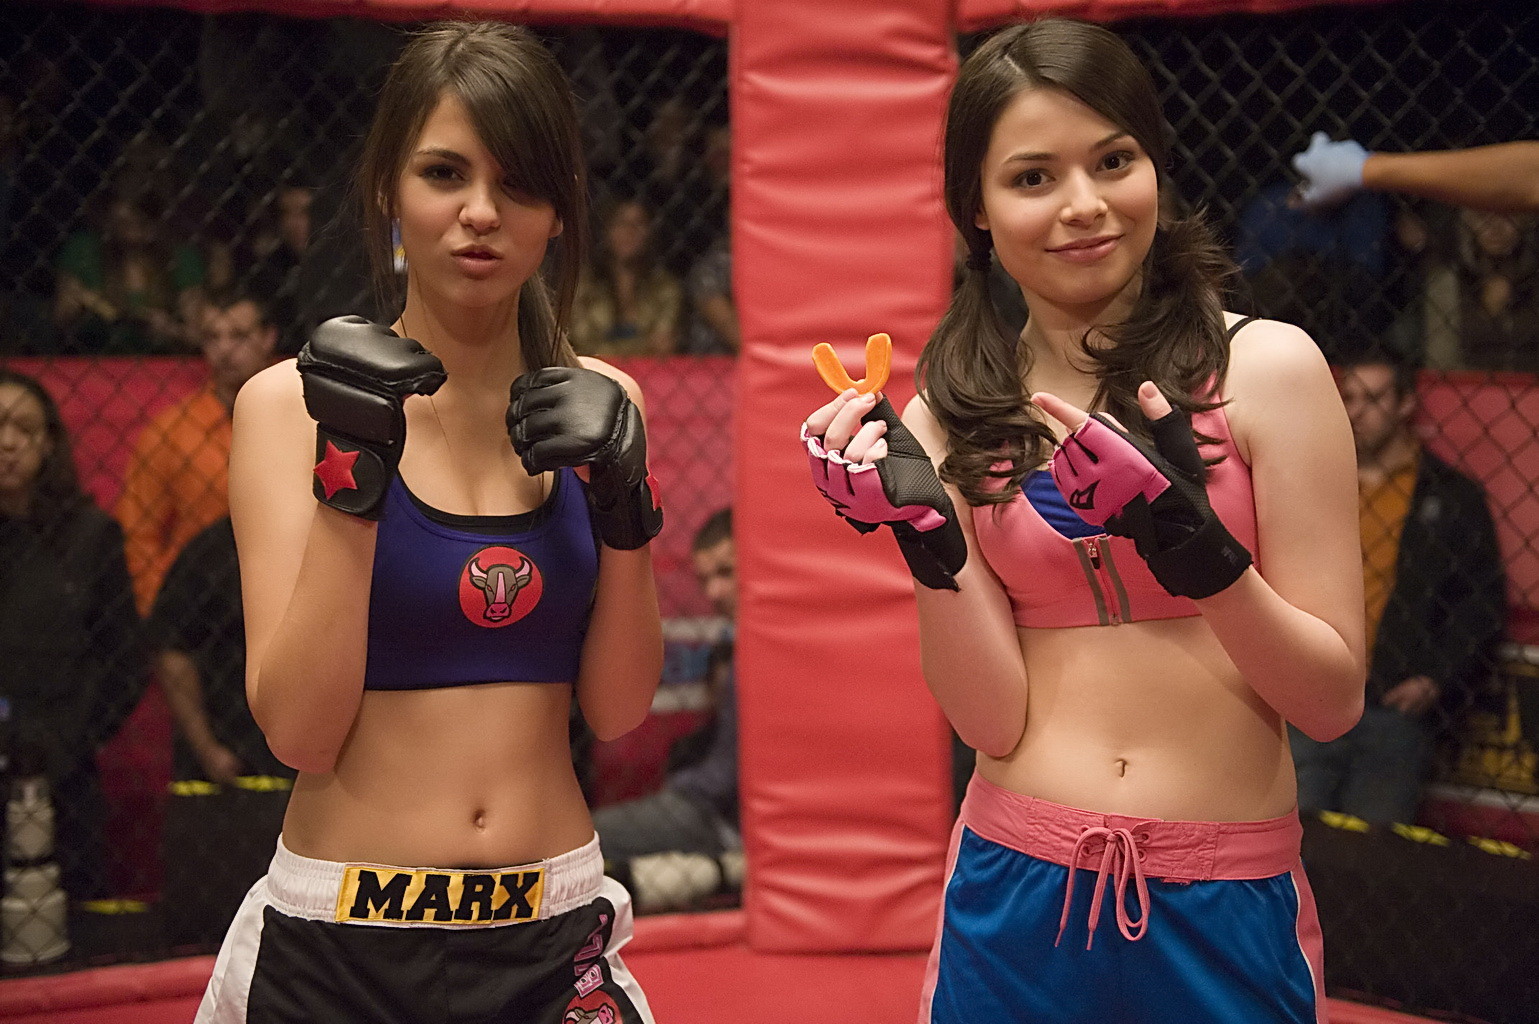 Victoria Justice Icarly Porn - Miranda Cosgrove wearing sports bra and shorts boxing with Victoria Justice  on t Porn Pictures, XXX Photos, Sex Images #3234407 - PICTOA